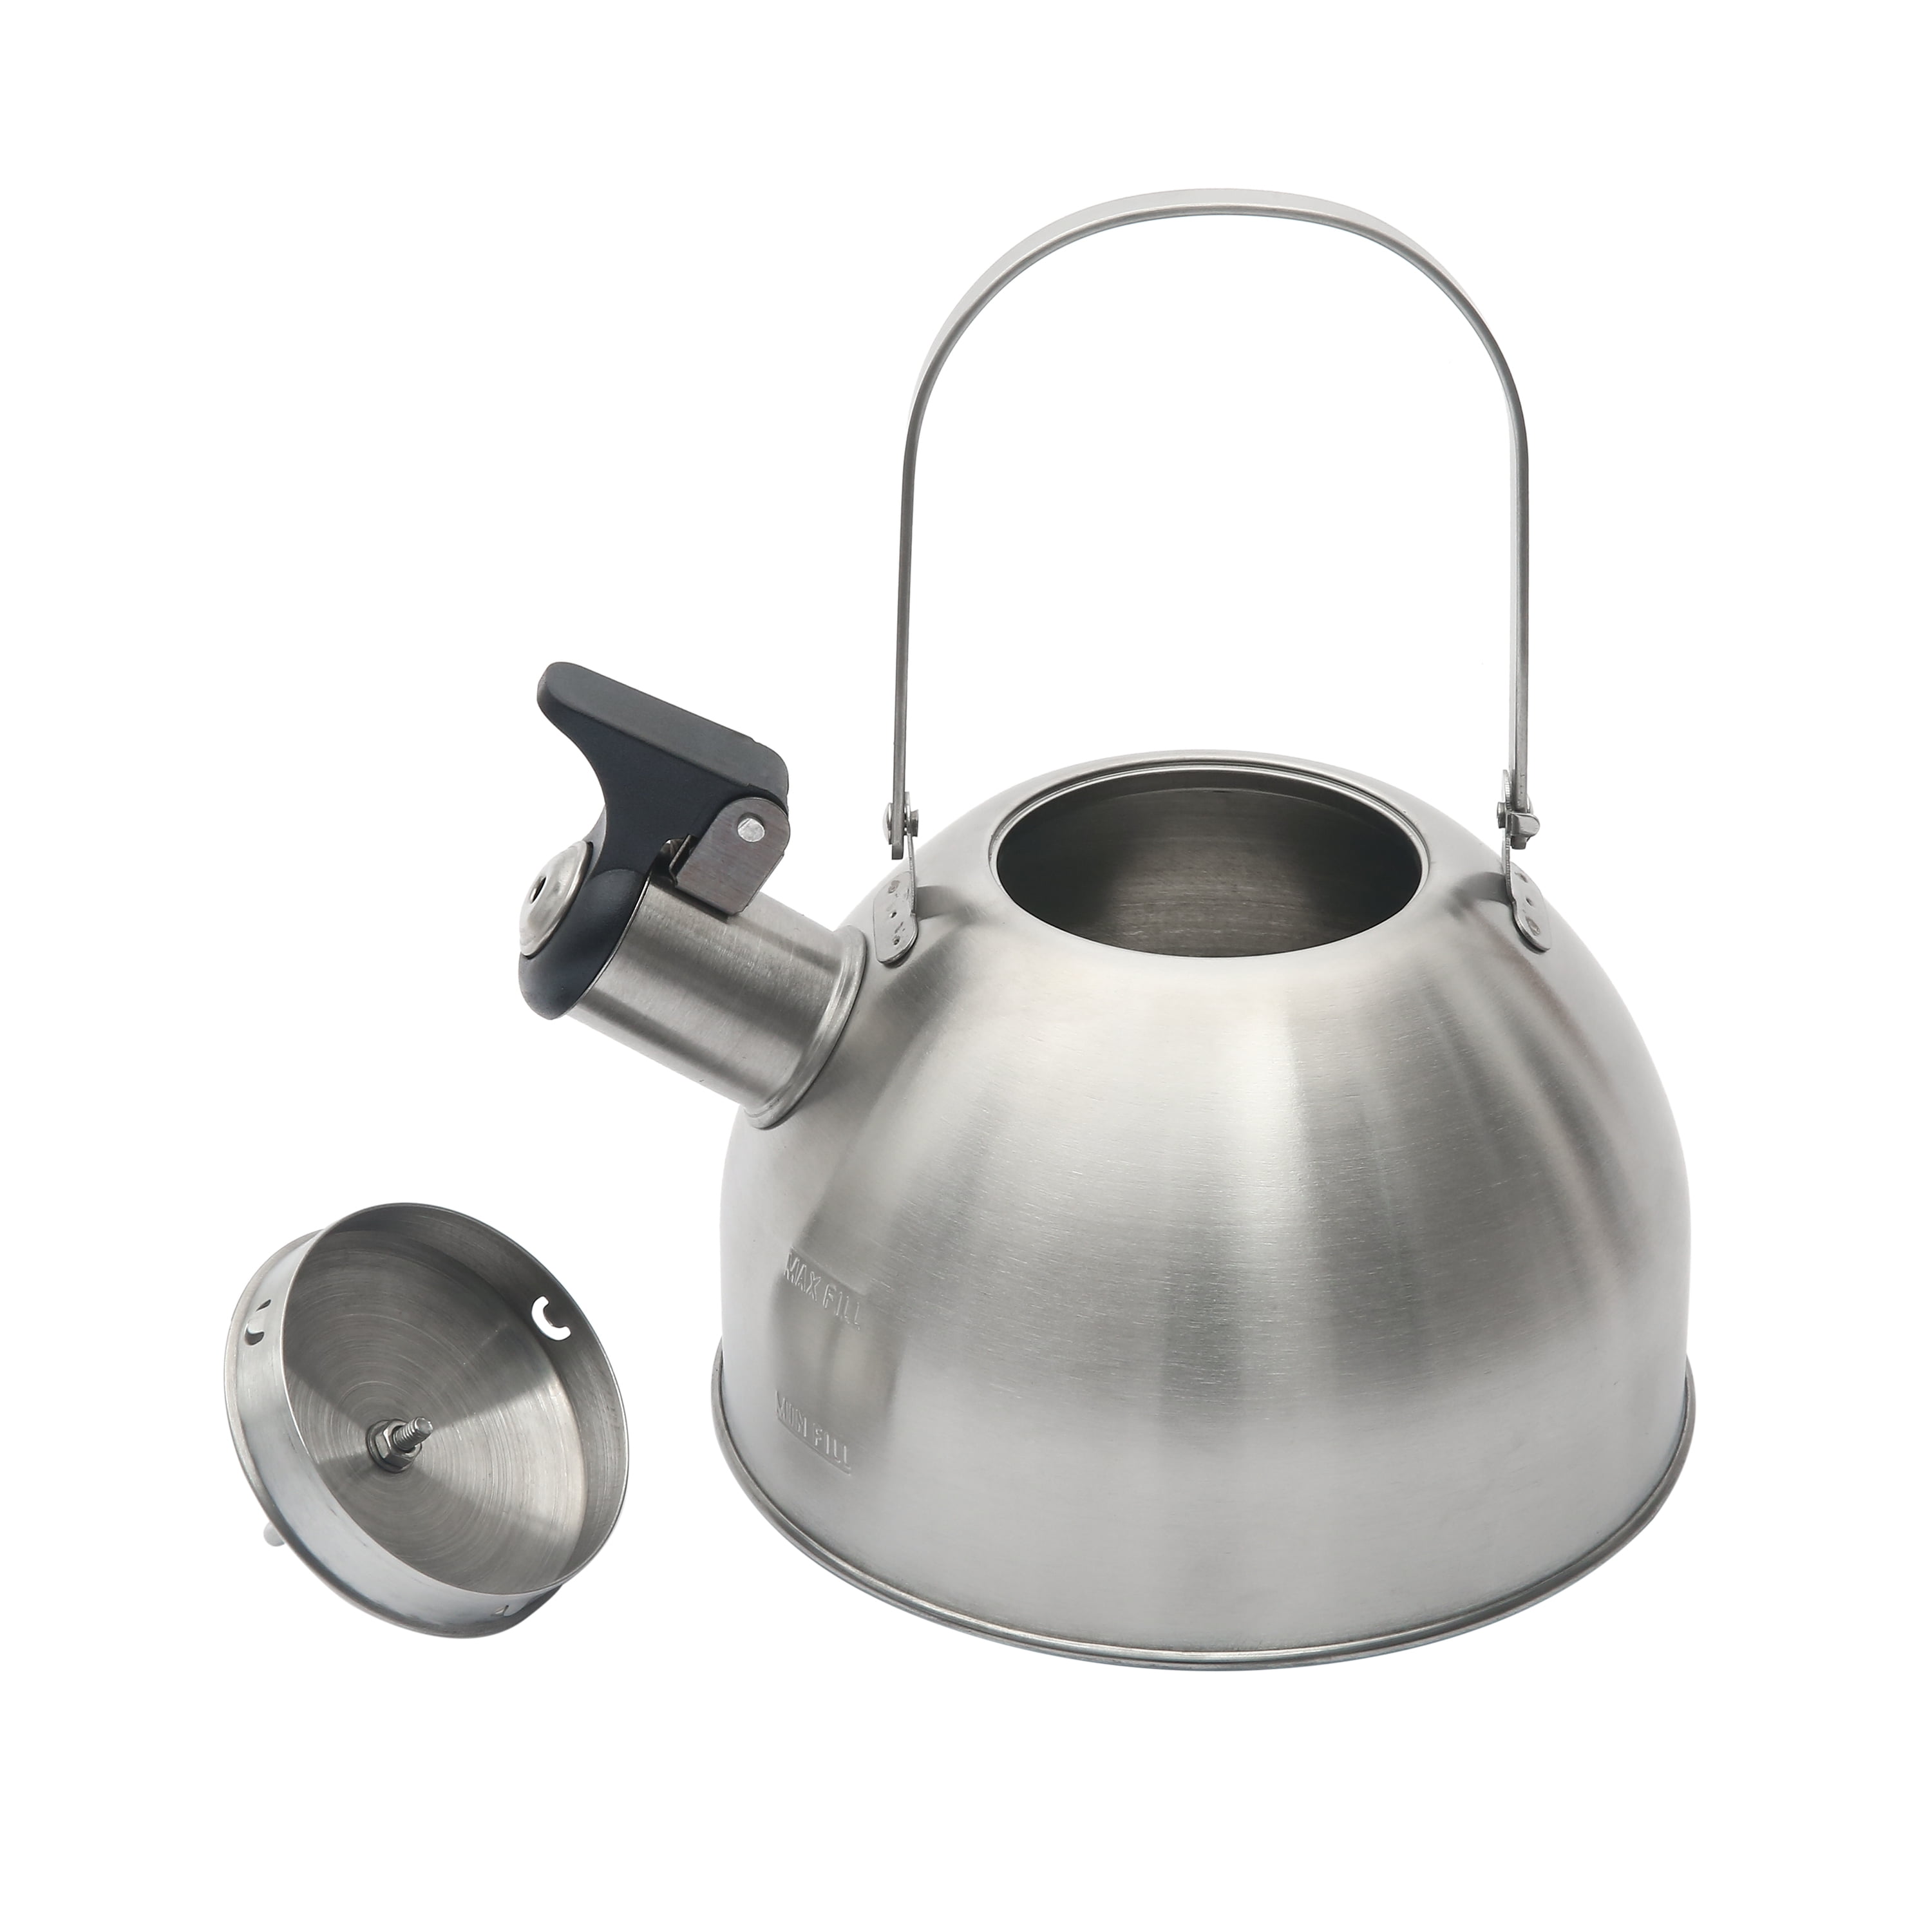 Milestone Stainless Steel Whistling Camping Kettle Silver 2L 